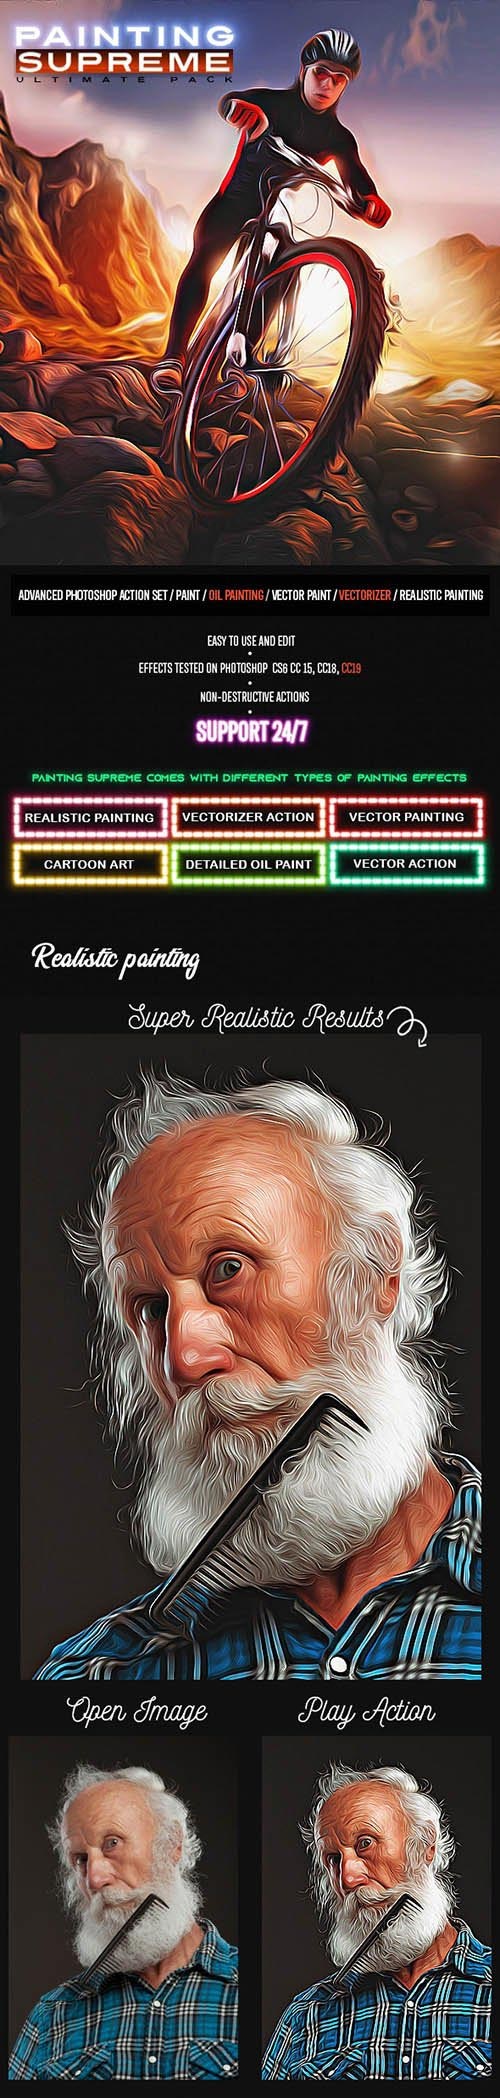 Supreme Painting Photoshop Actions 24884912